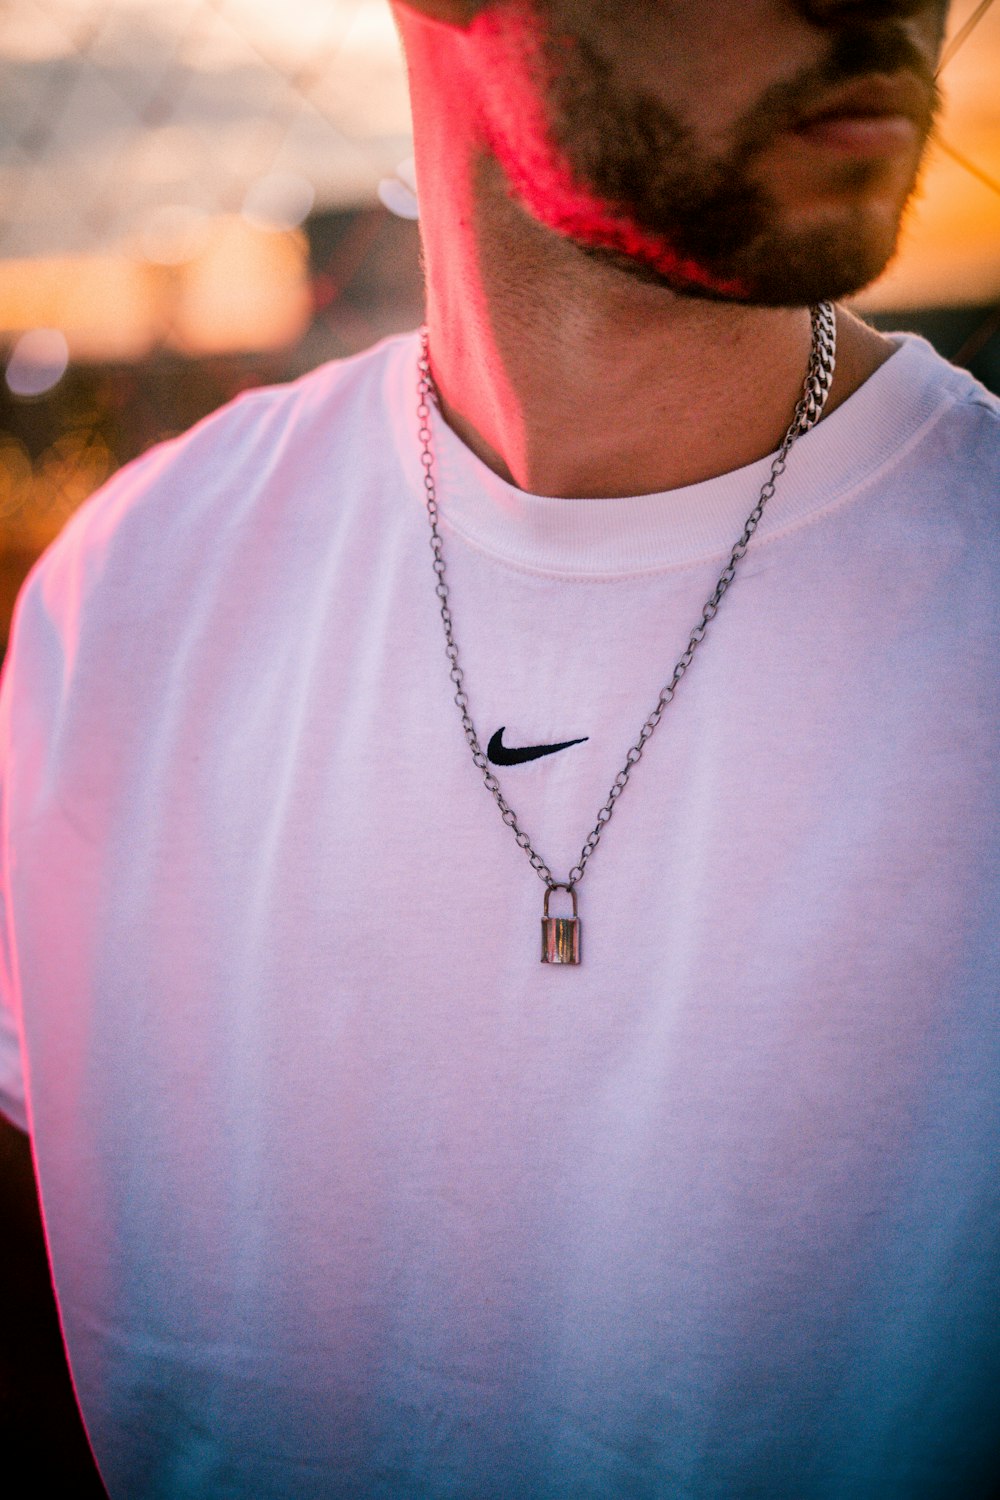 man in white crew neck shirt wearing silver necklace